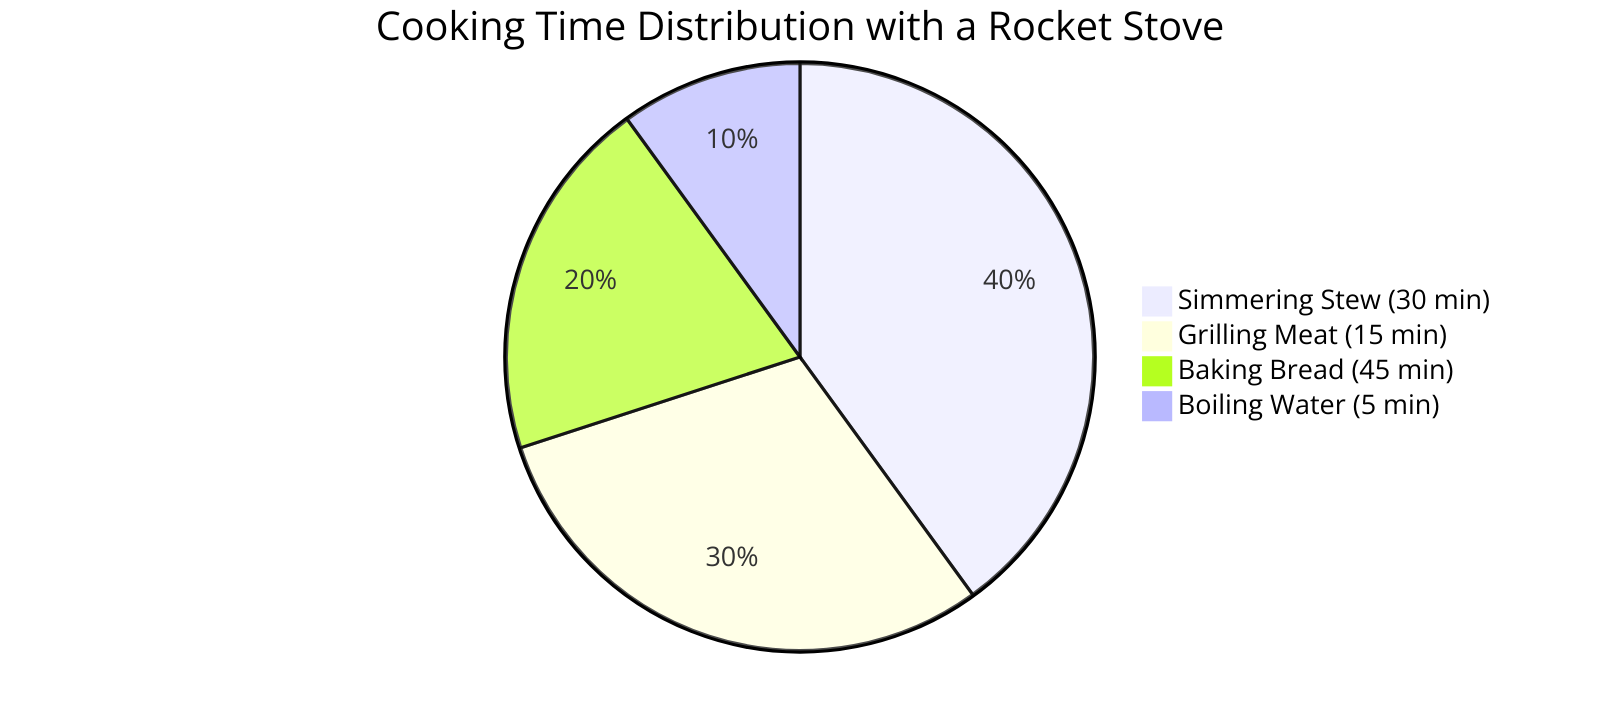 the distribution of cooking time for different meals using a rocket stove, highlighting its efficiency